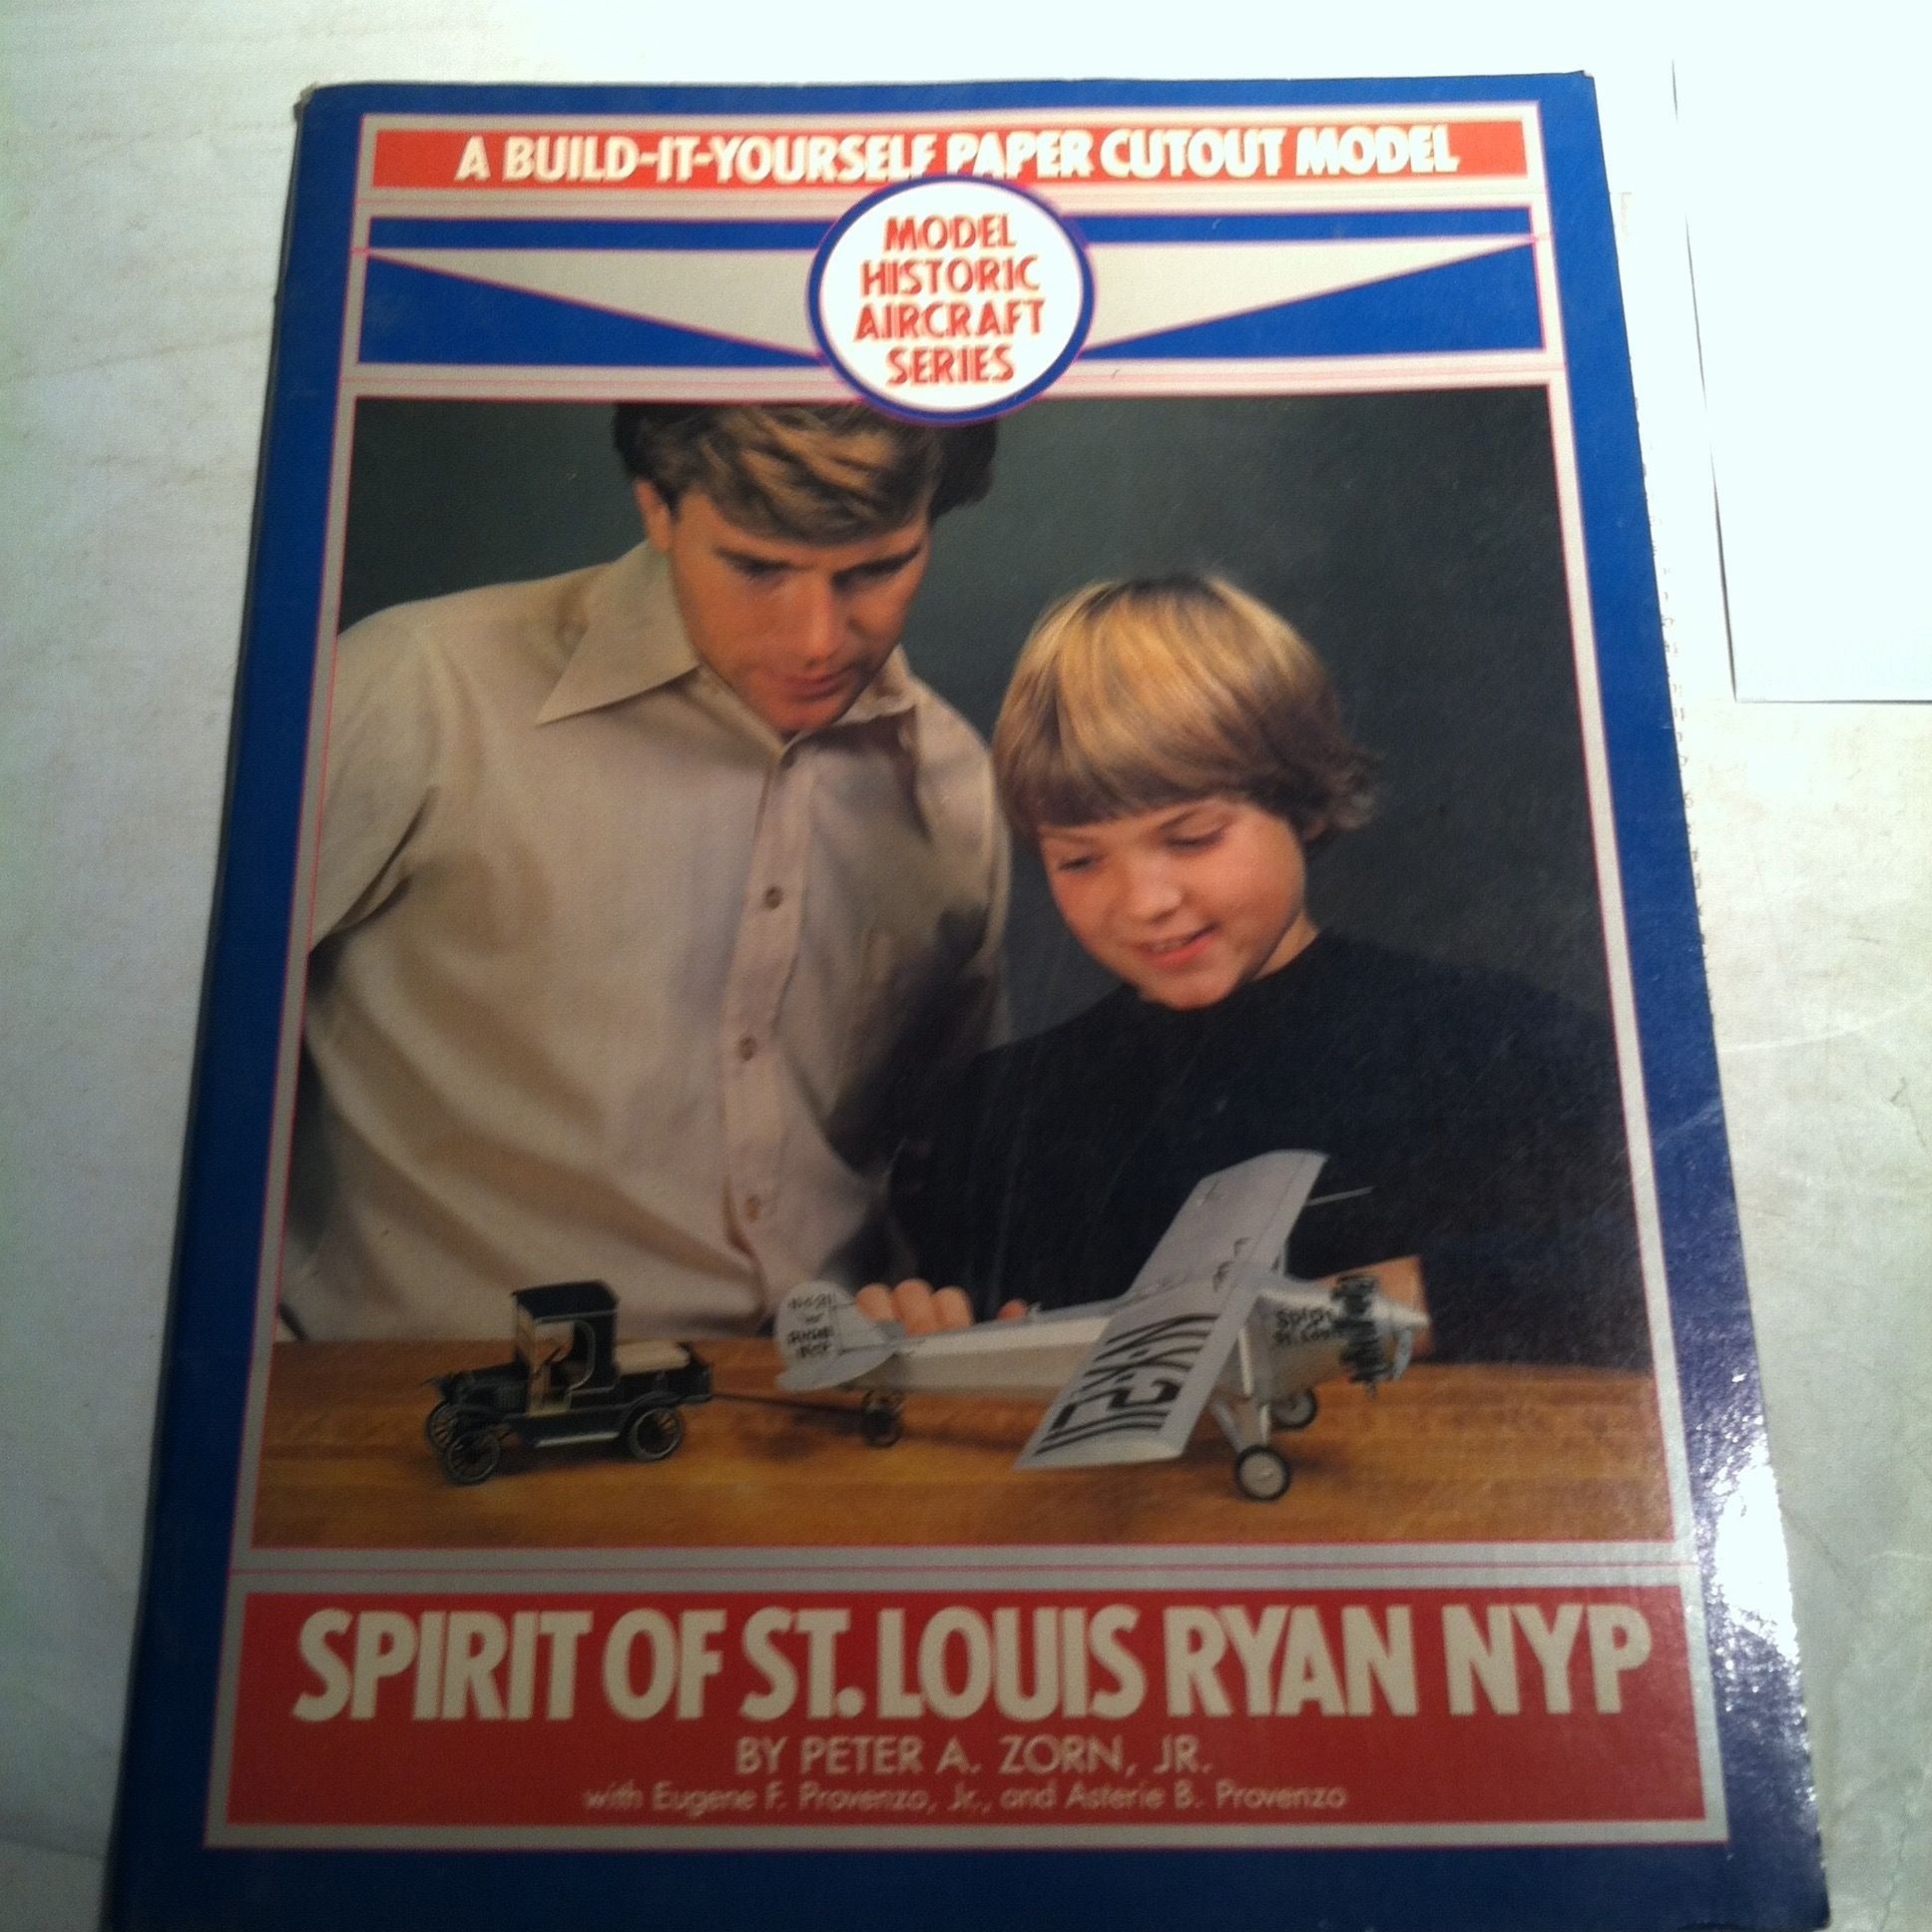 SPIRIT OF ST. LOUIS RYAN NYP A Build It Yourself Paper Cutout Model by Peter A Zorn